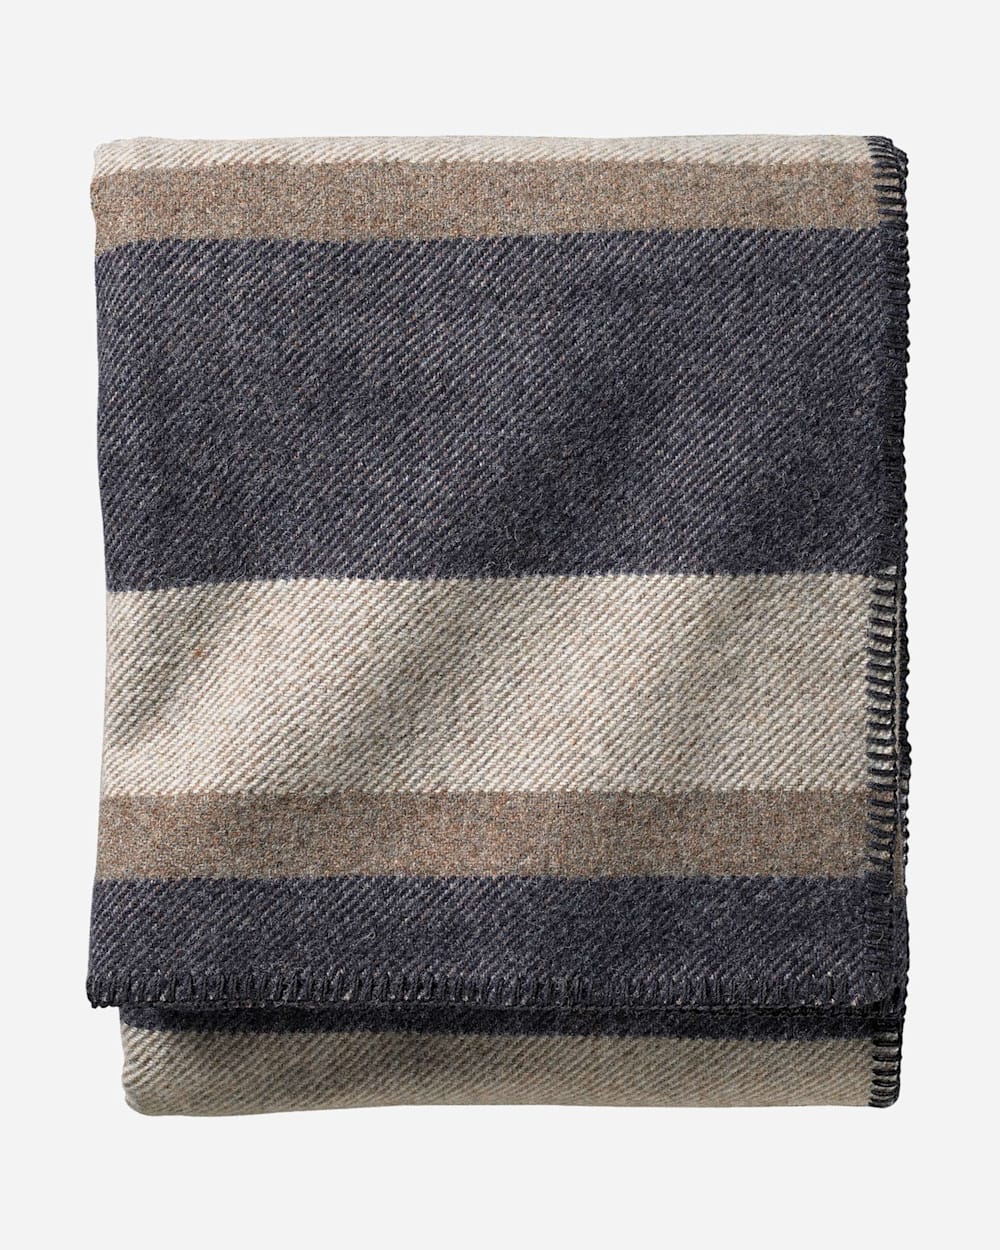 ECO-WISE WOOL PLAID/STRIPE BLANKET IN MIDNIGHT NAVY STRIPE FOLDED image number 1